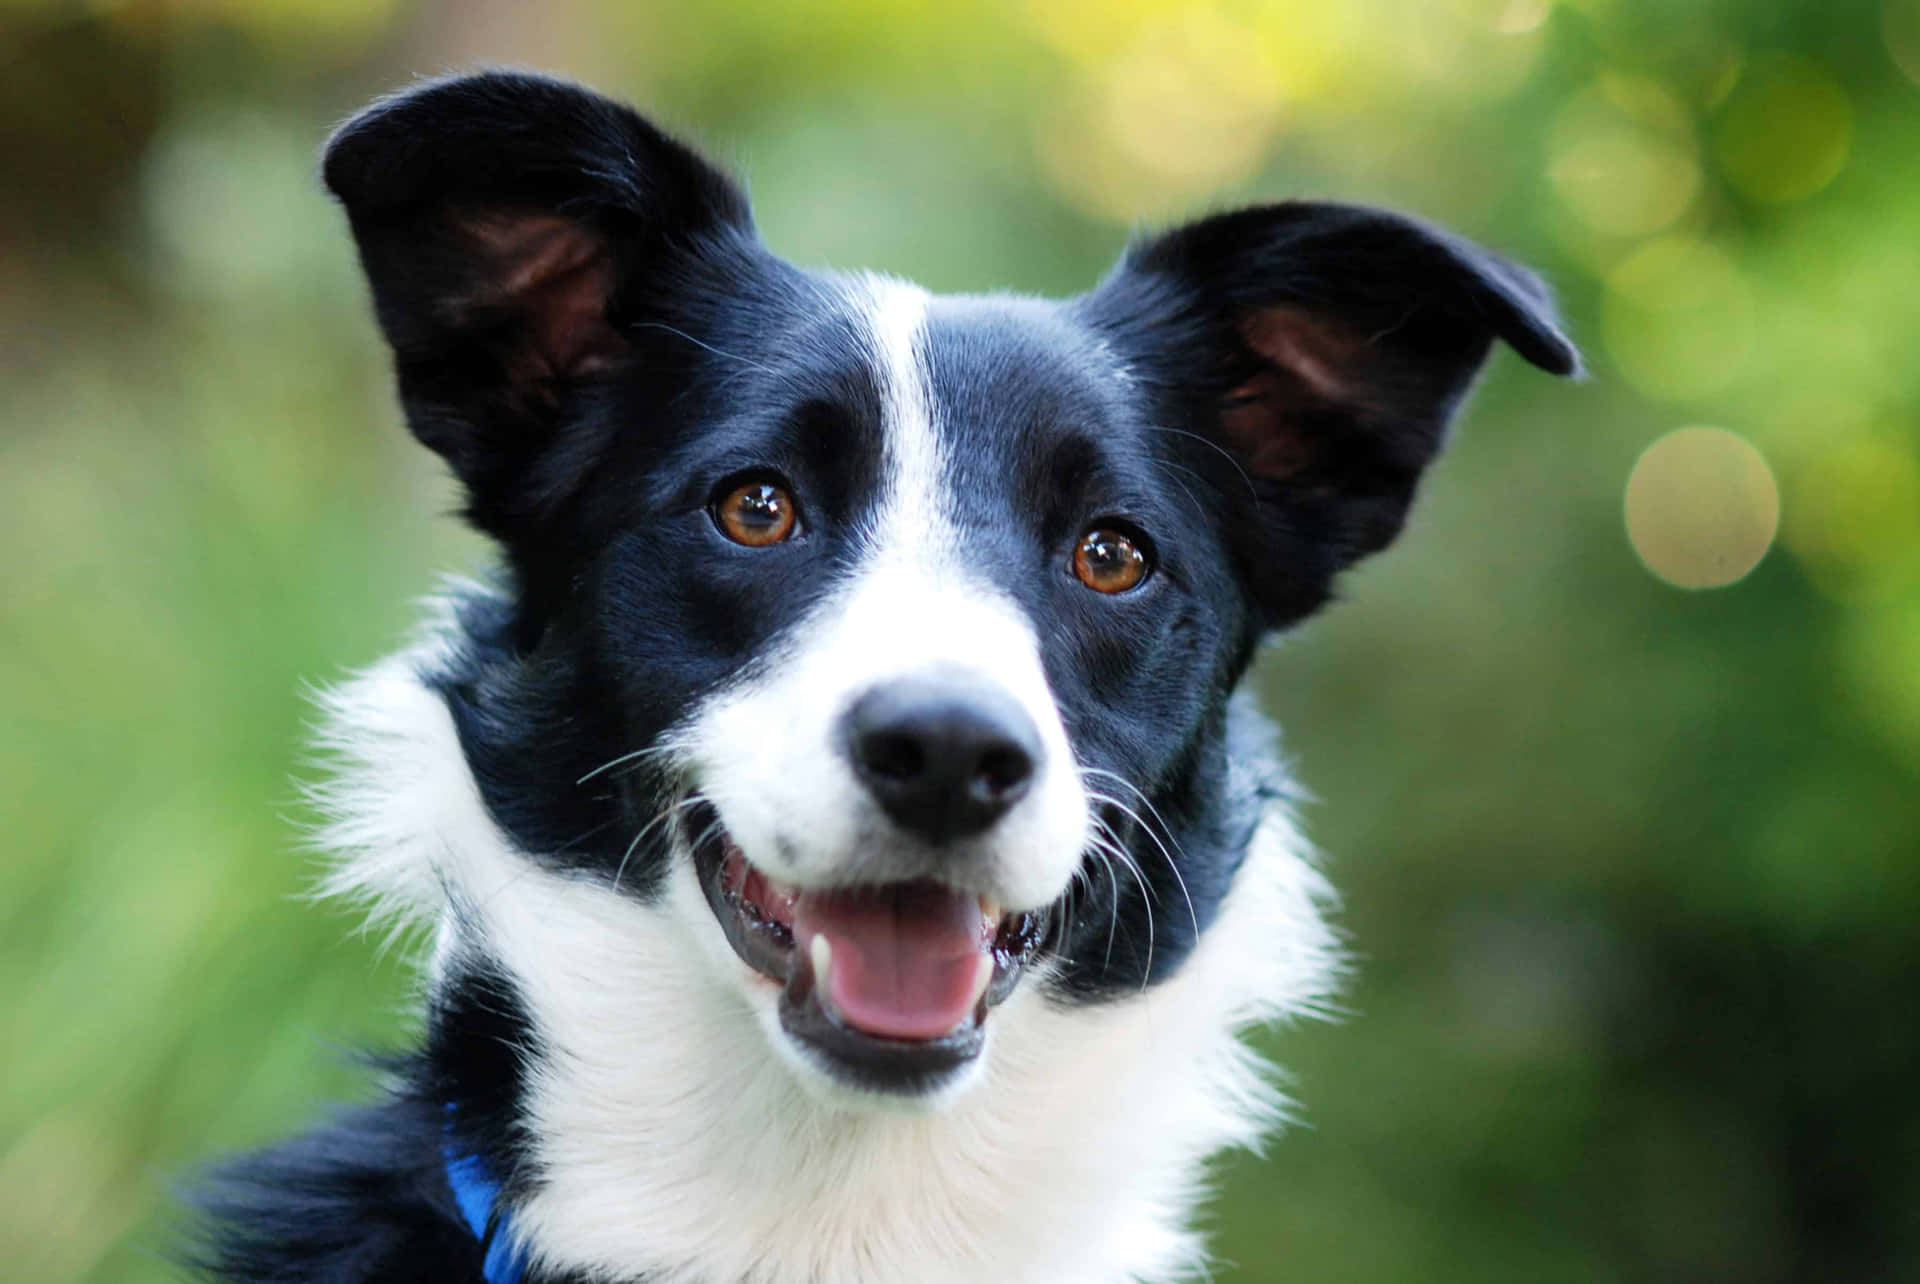 This cute Border Collie pup is happy to see you